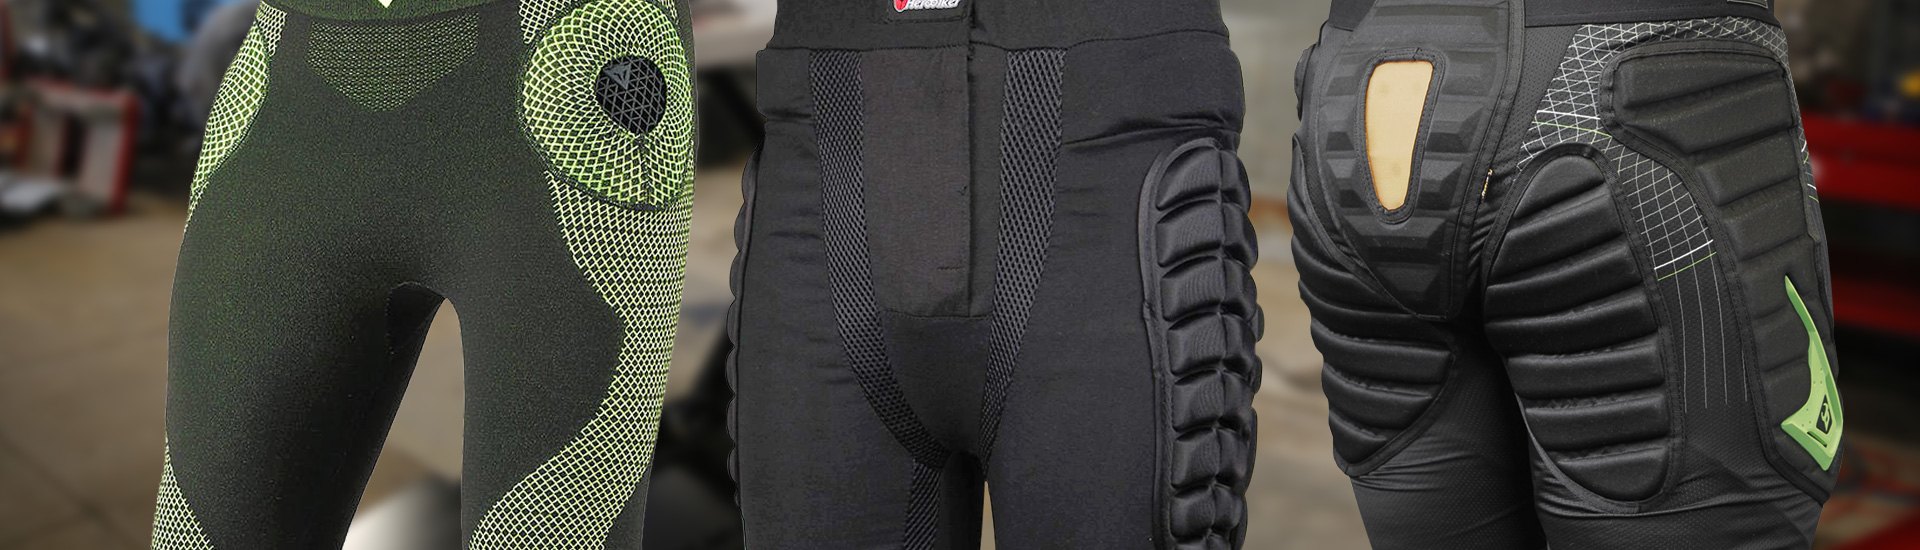 Powersports Armored Pants